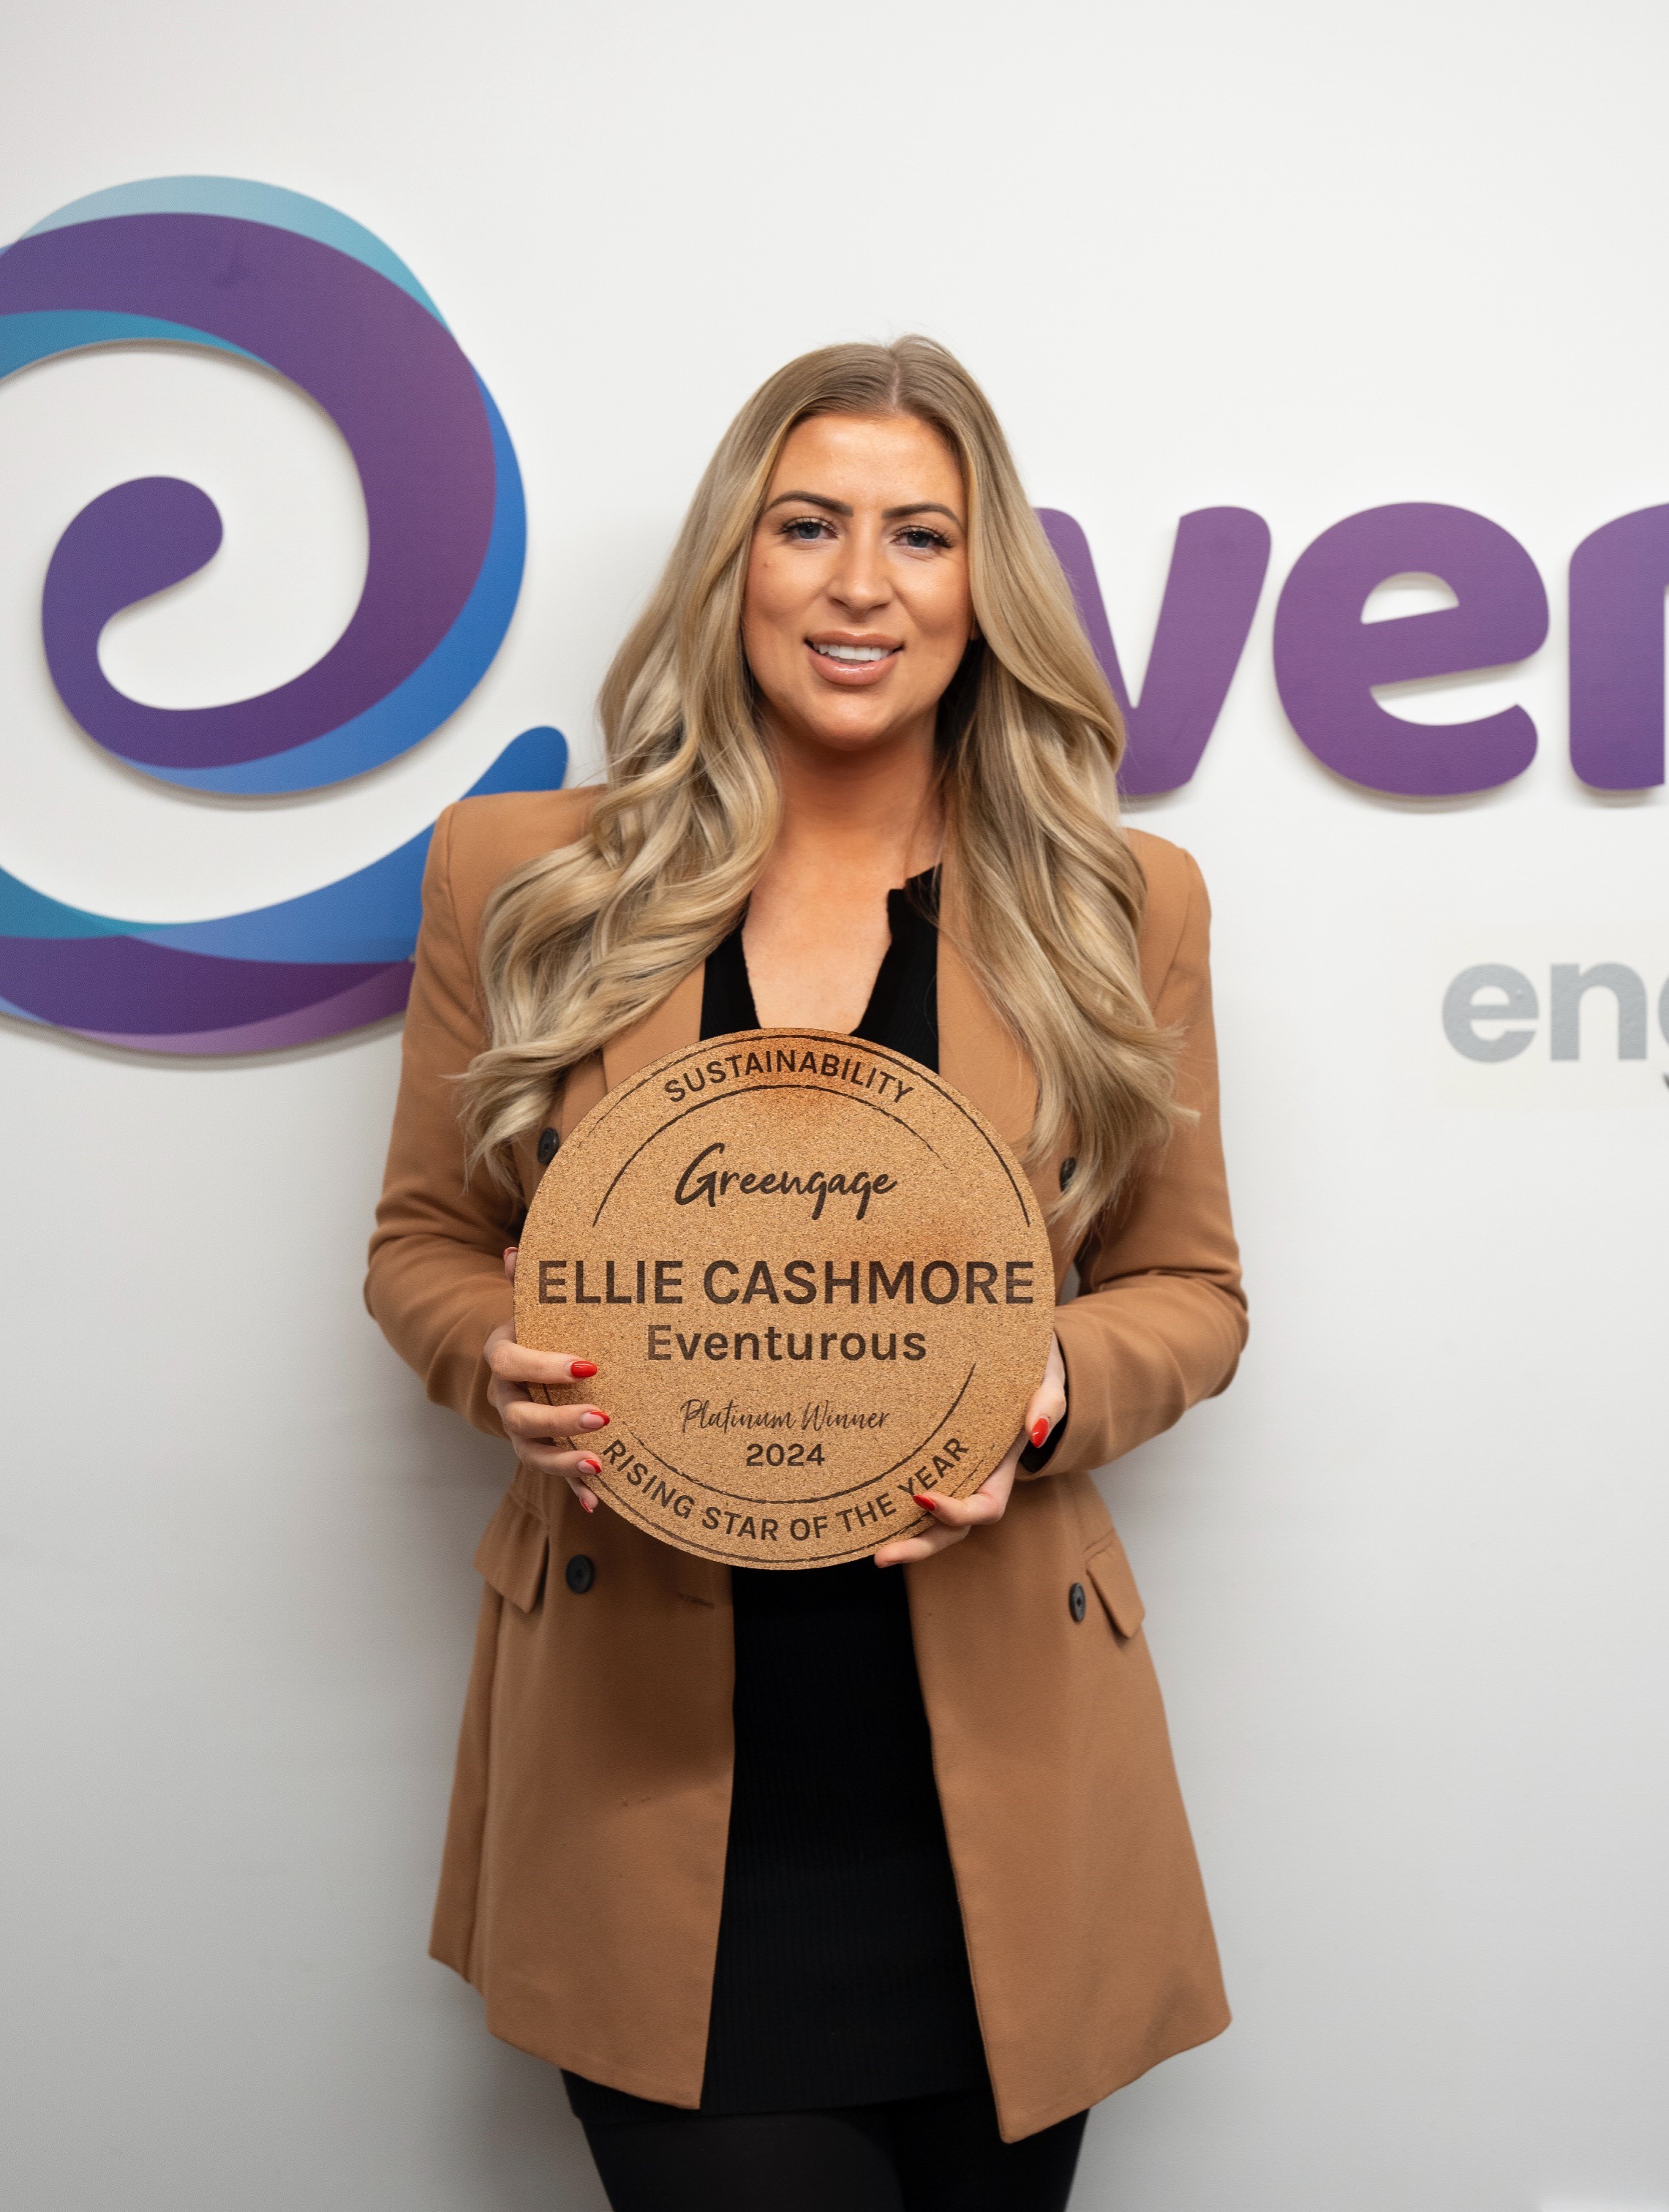 Eventurous Marketing Manager Named Rising Star of the Year at The Greengage Sustainability Awards 2024